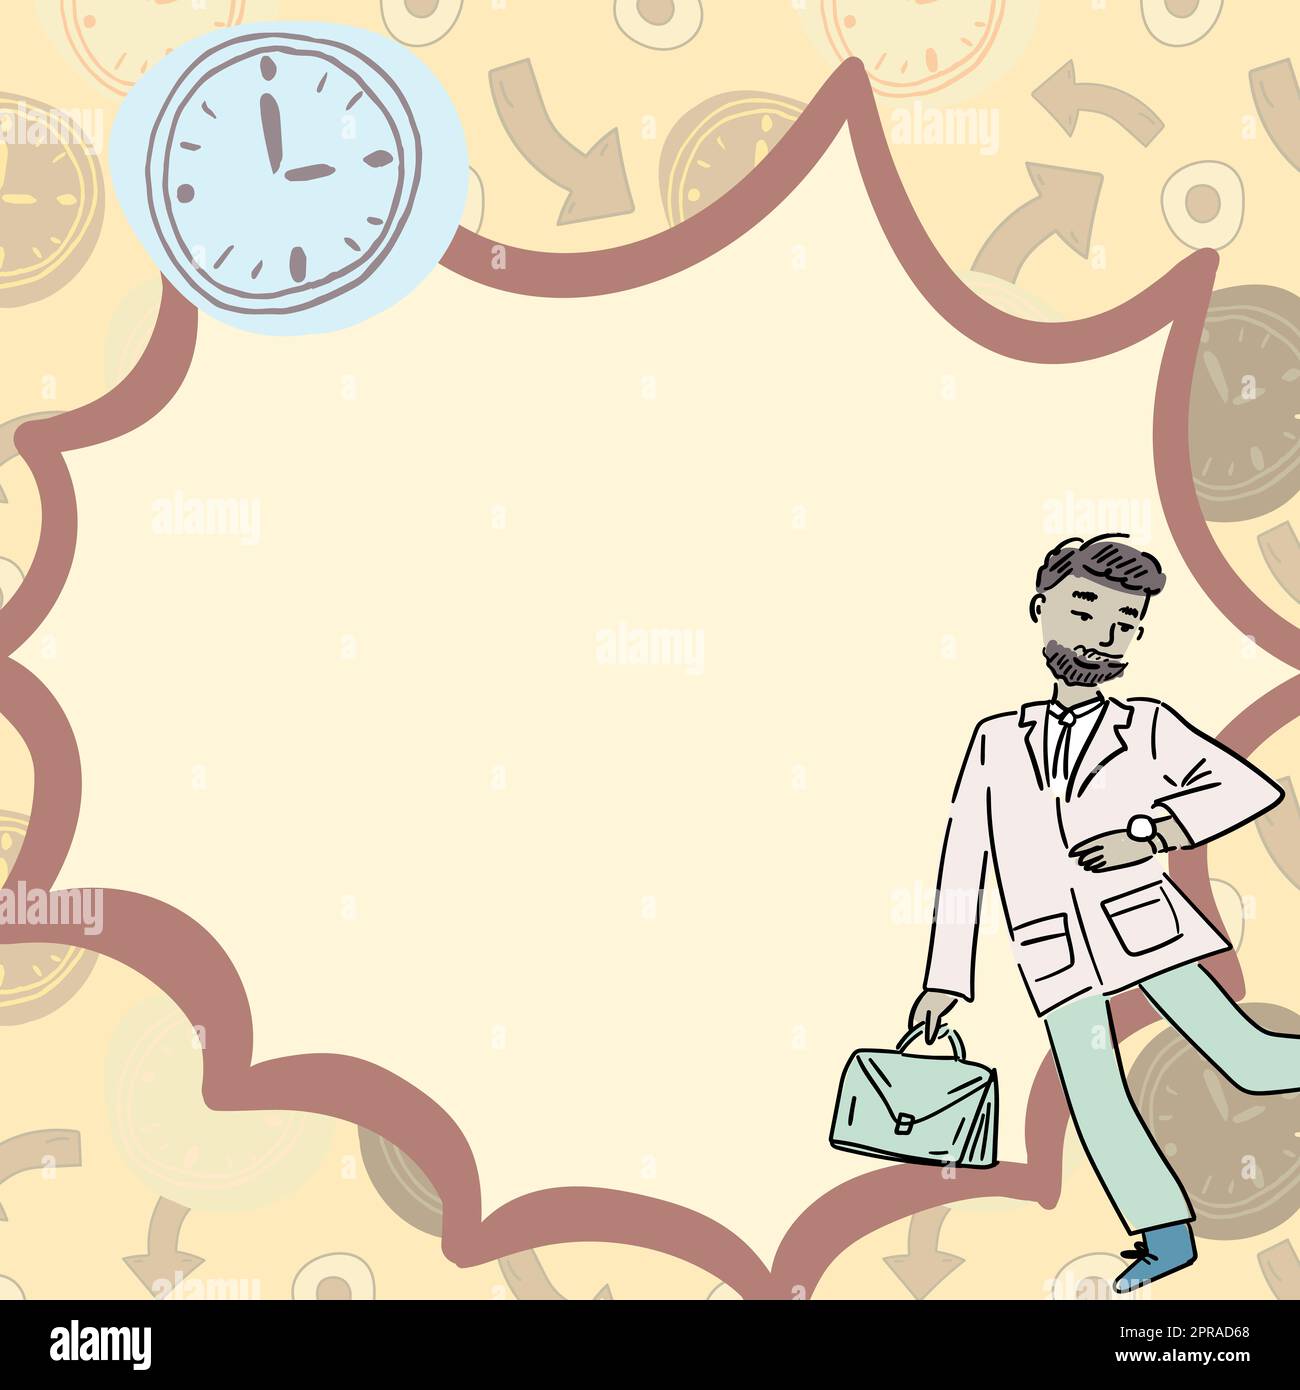 Professor With Briefcase Watching Watches To Check Time With Wall Mount Clock. Business Man Being Late Checking Time On Hand Watch. Space For Text Background Stock Photo